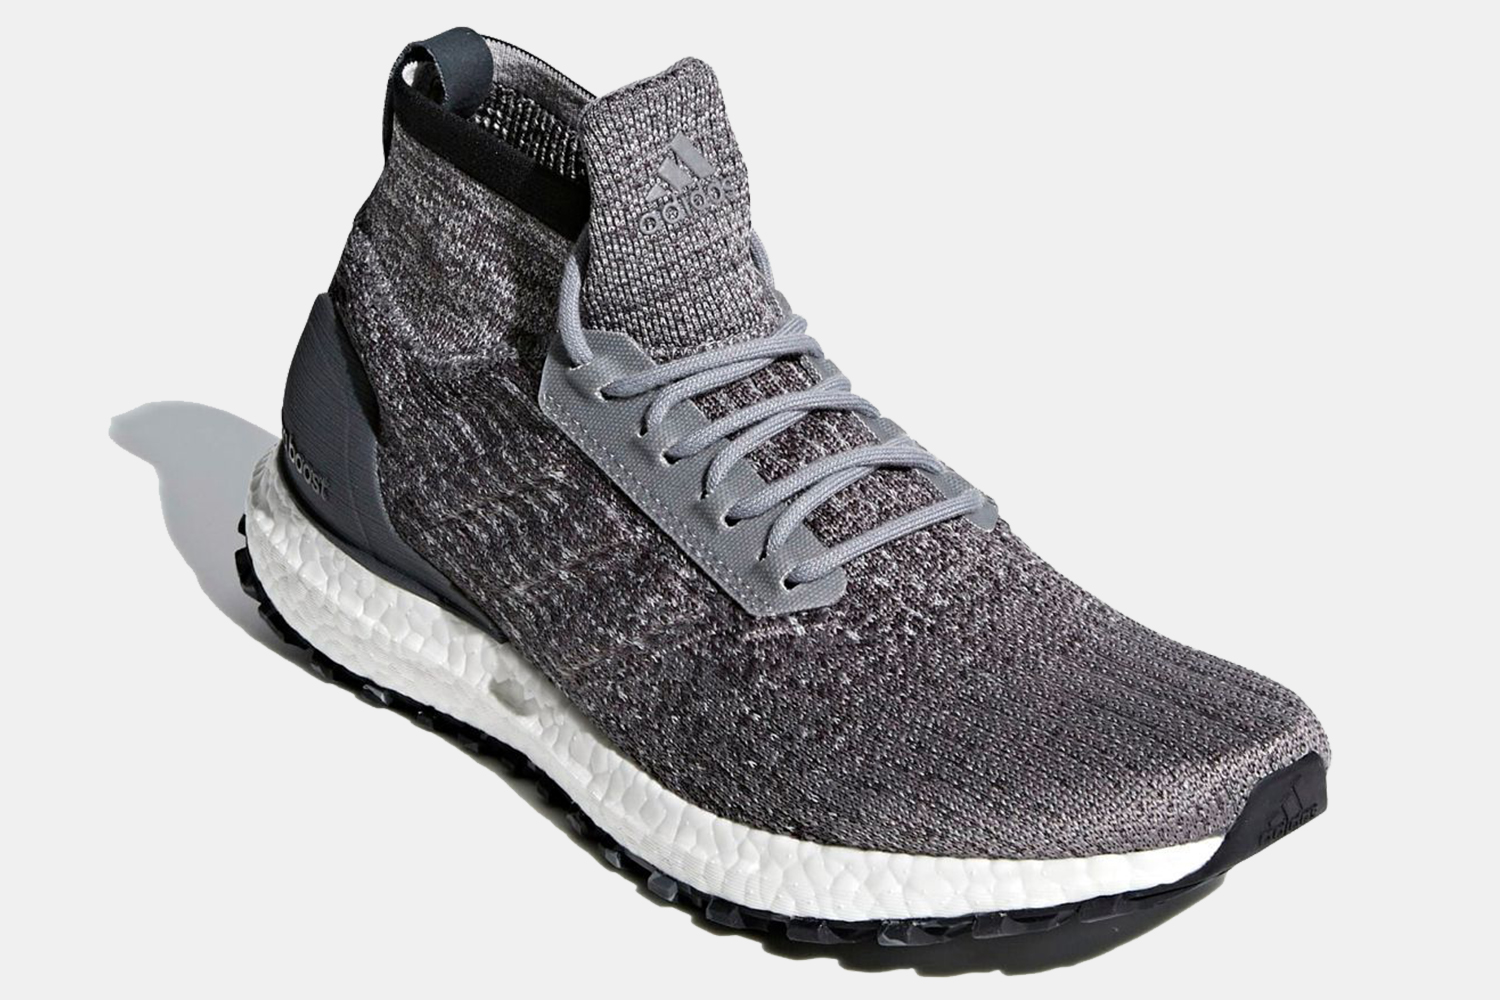 Take Up to 50% Off Ultraboosts, NMDs and Your Other Favorite Adidas ...